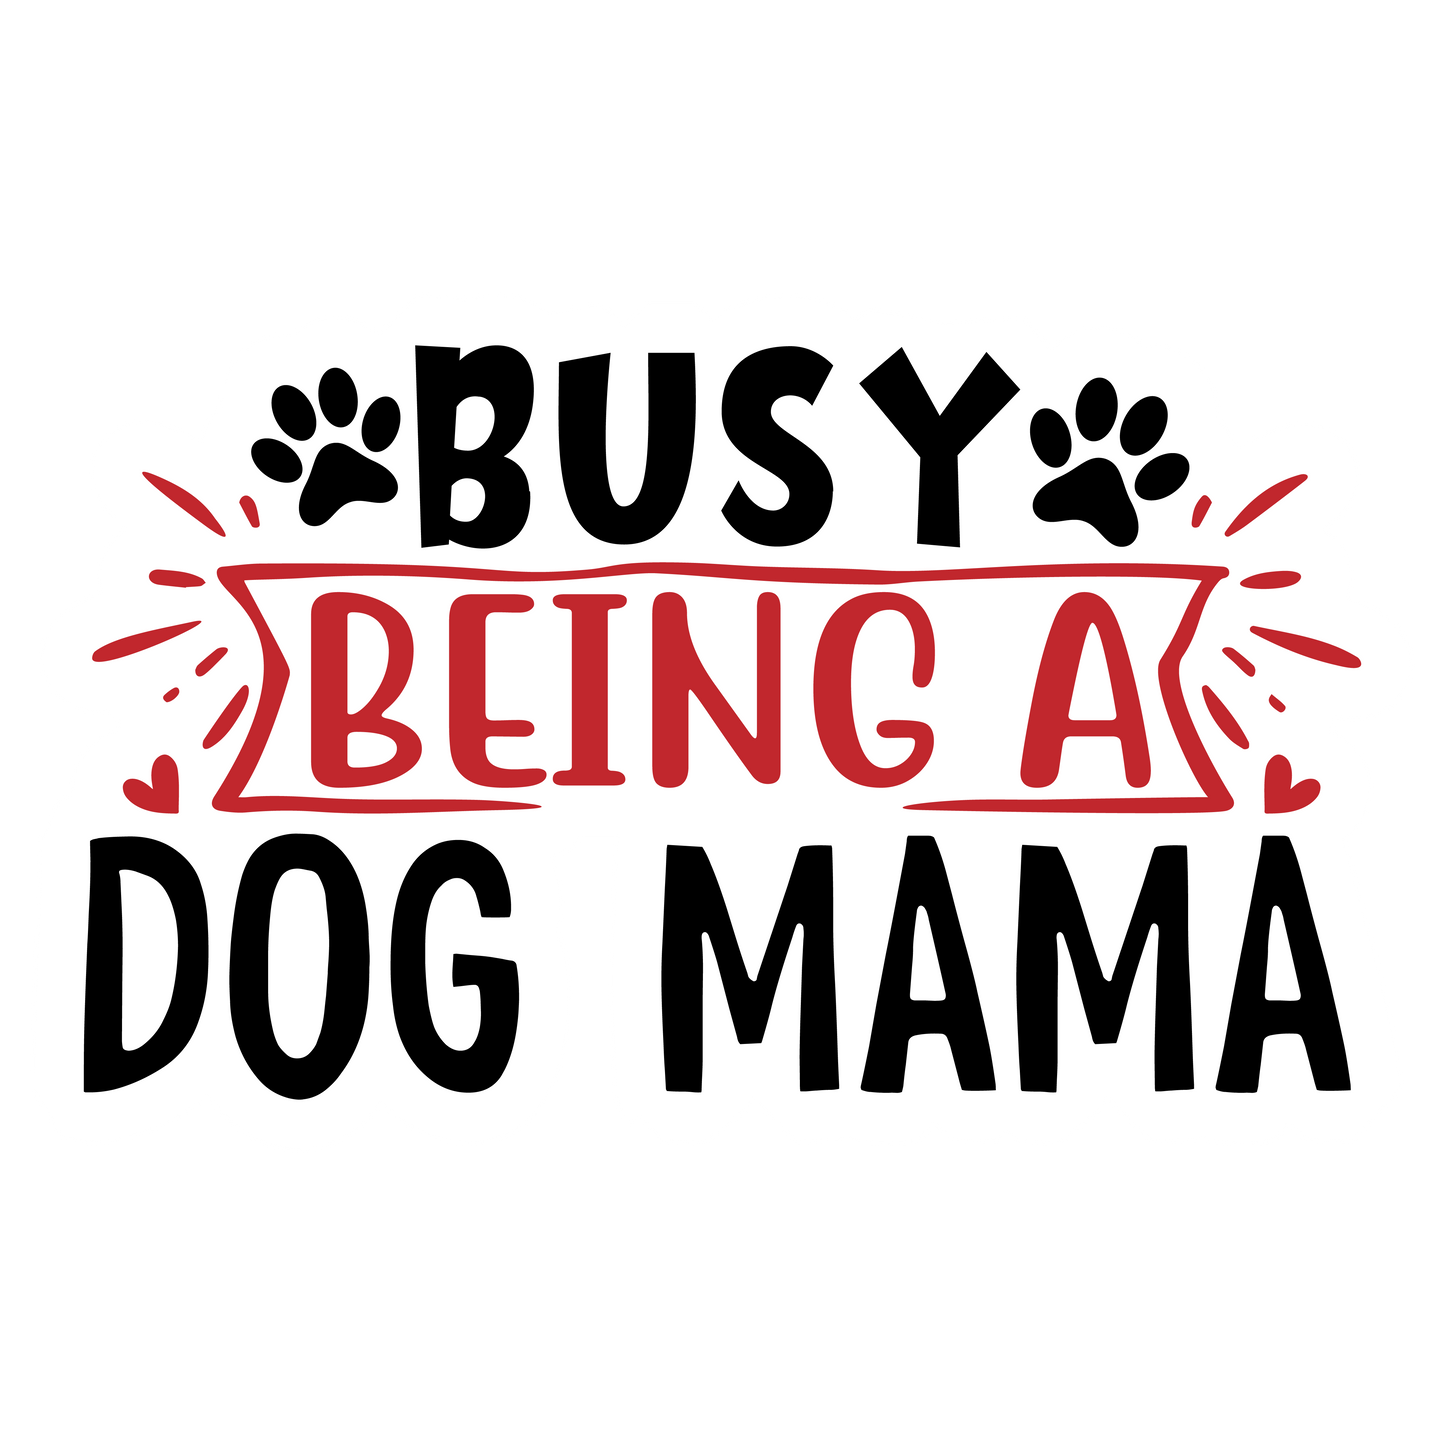 Stickers - Dog Lovers Phrases Busy Being a Dog Mama